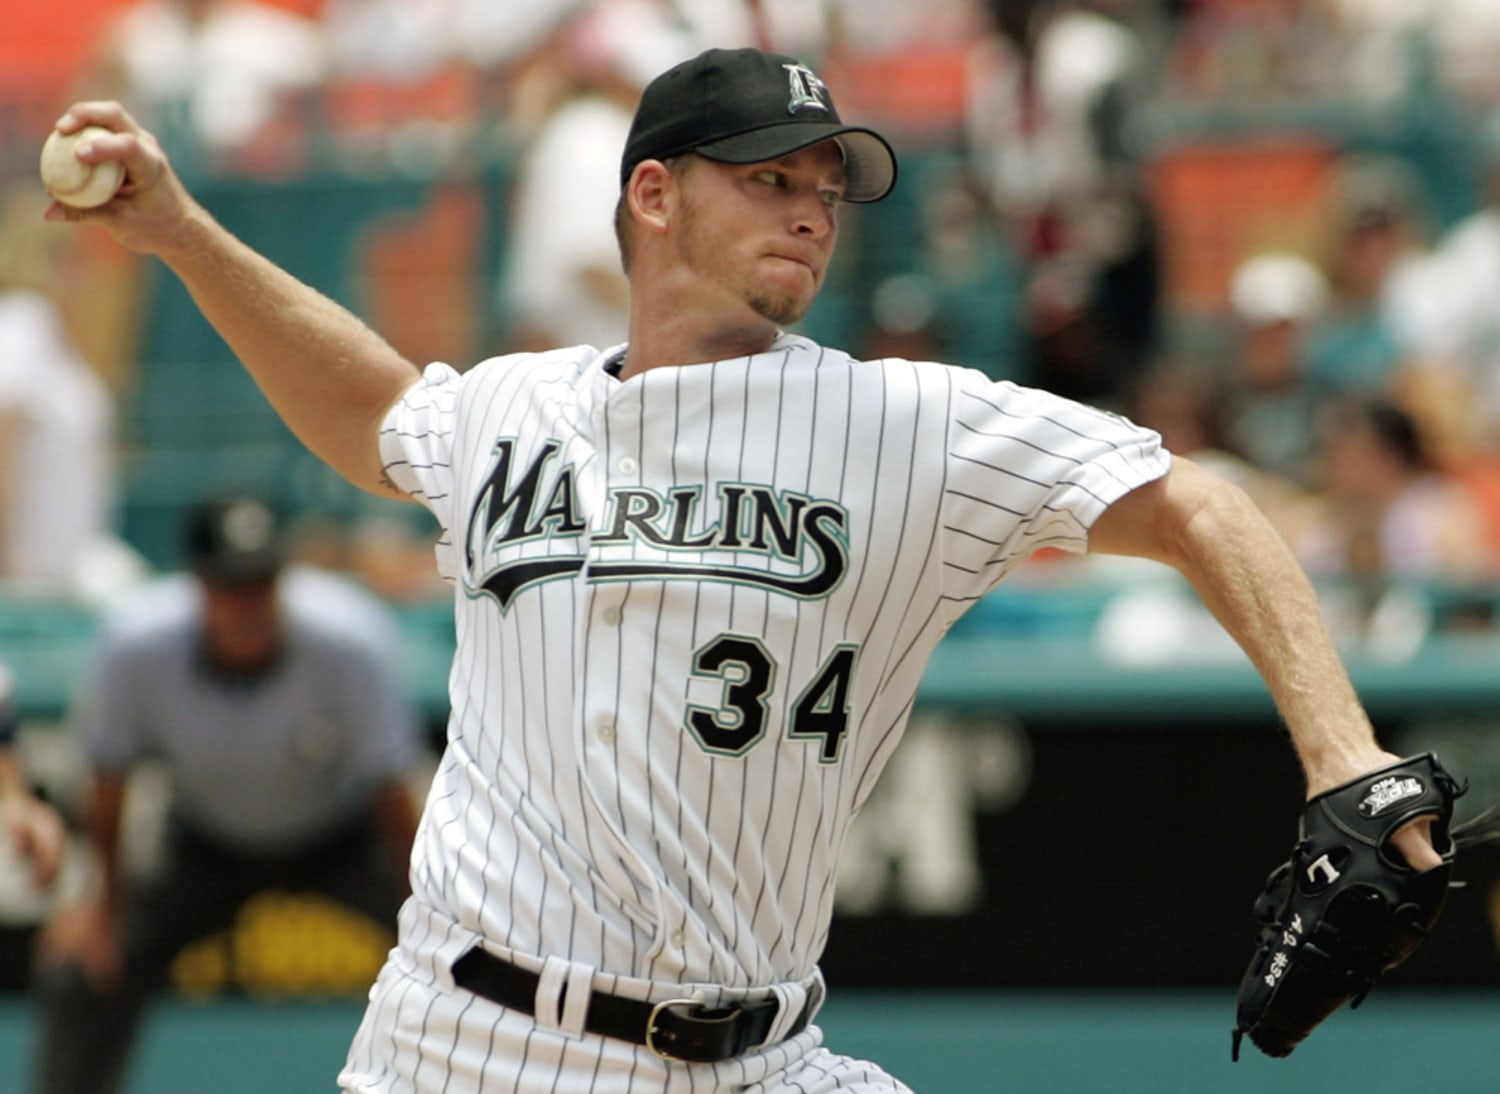 The Best and Worst Uniforms of All Time: The Florida Marlins - NBC